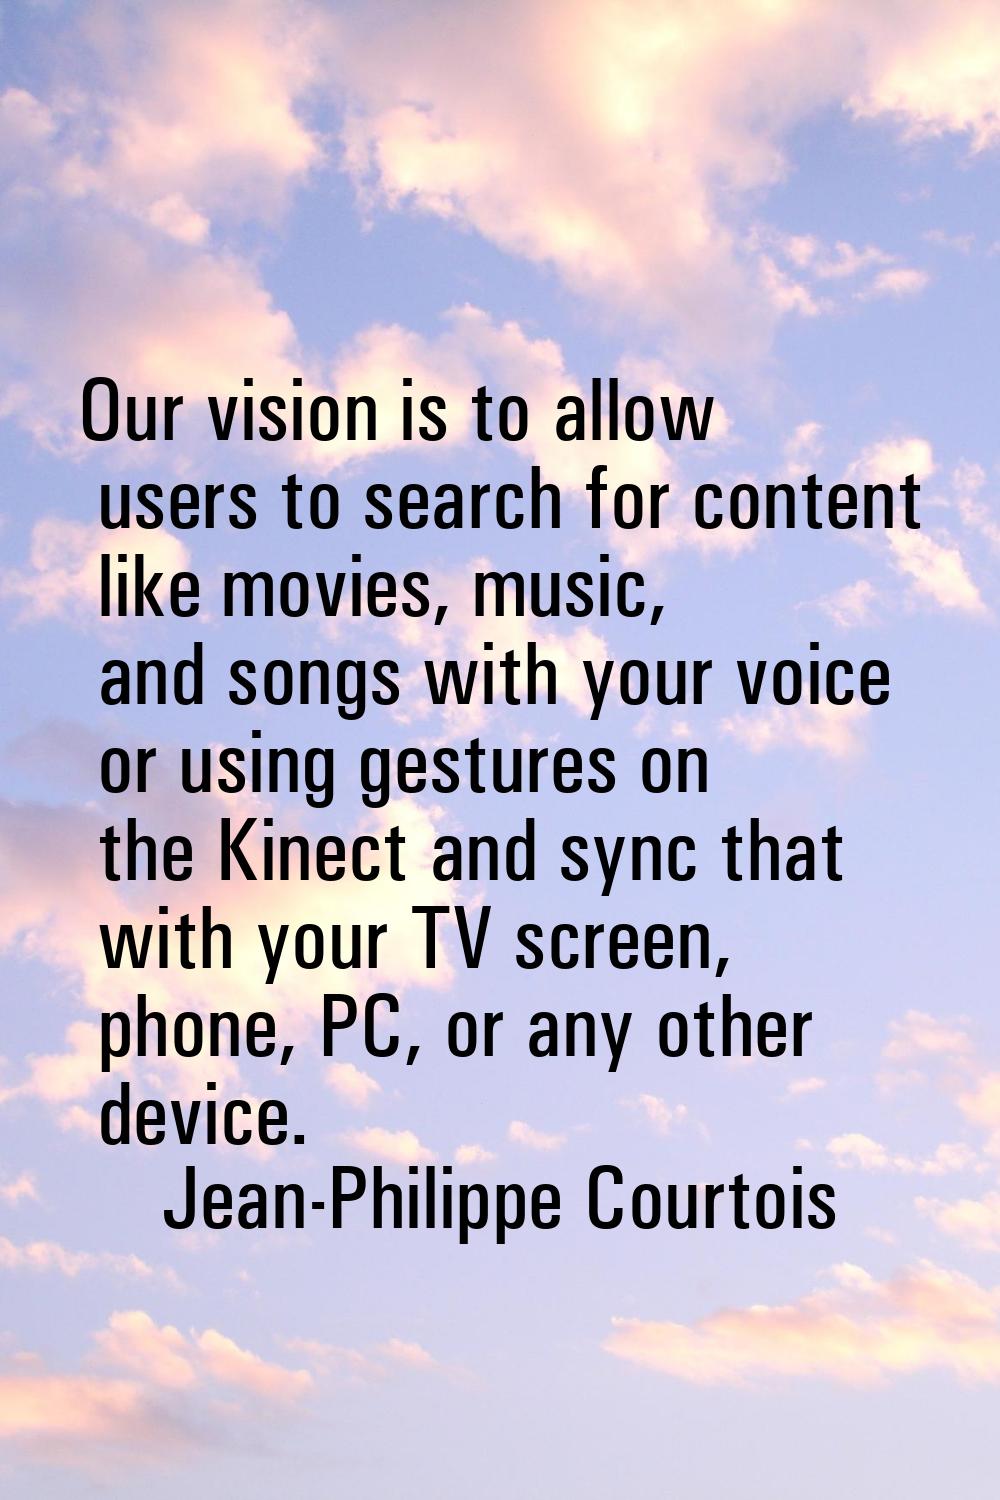 Our vision is to allow users to search for content like movies, music, and songs with your voice or